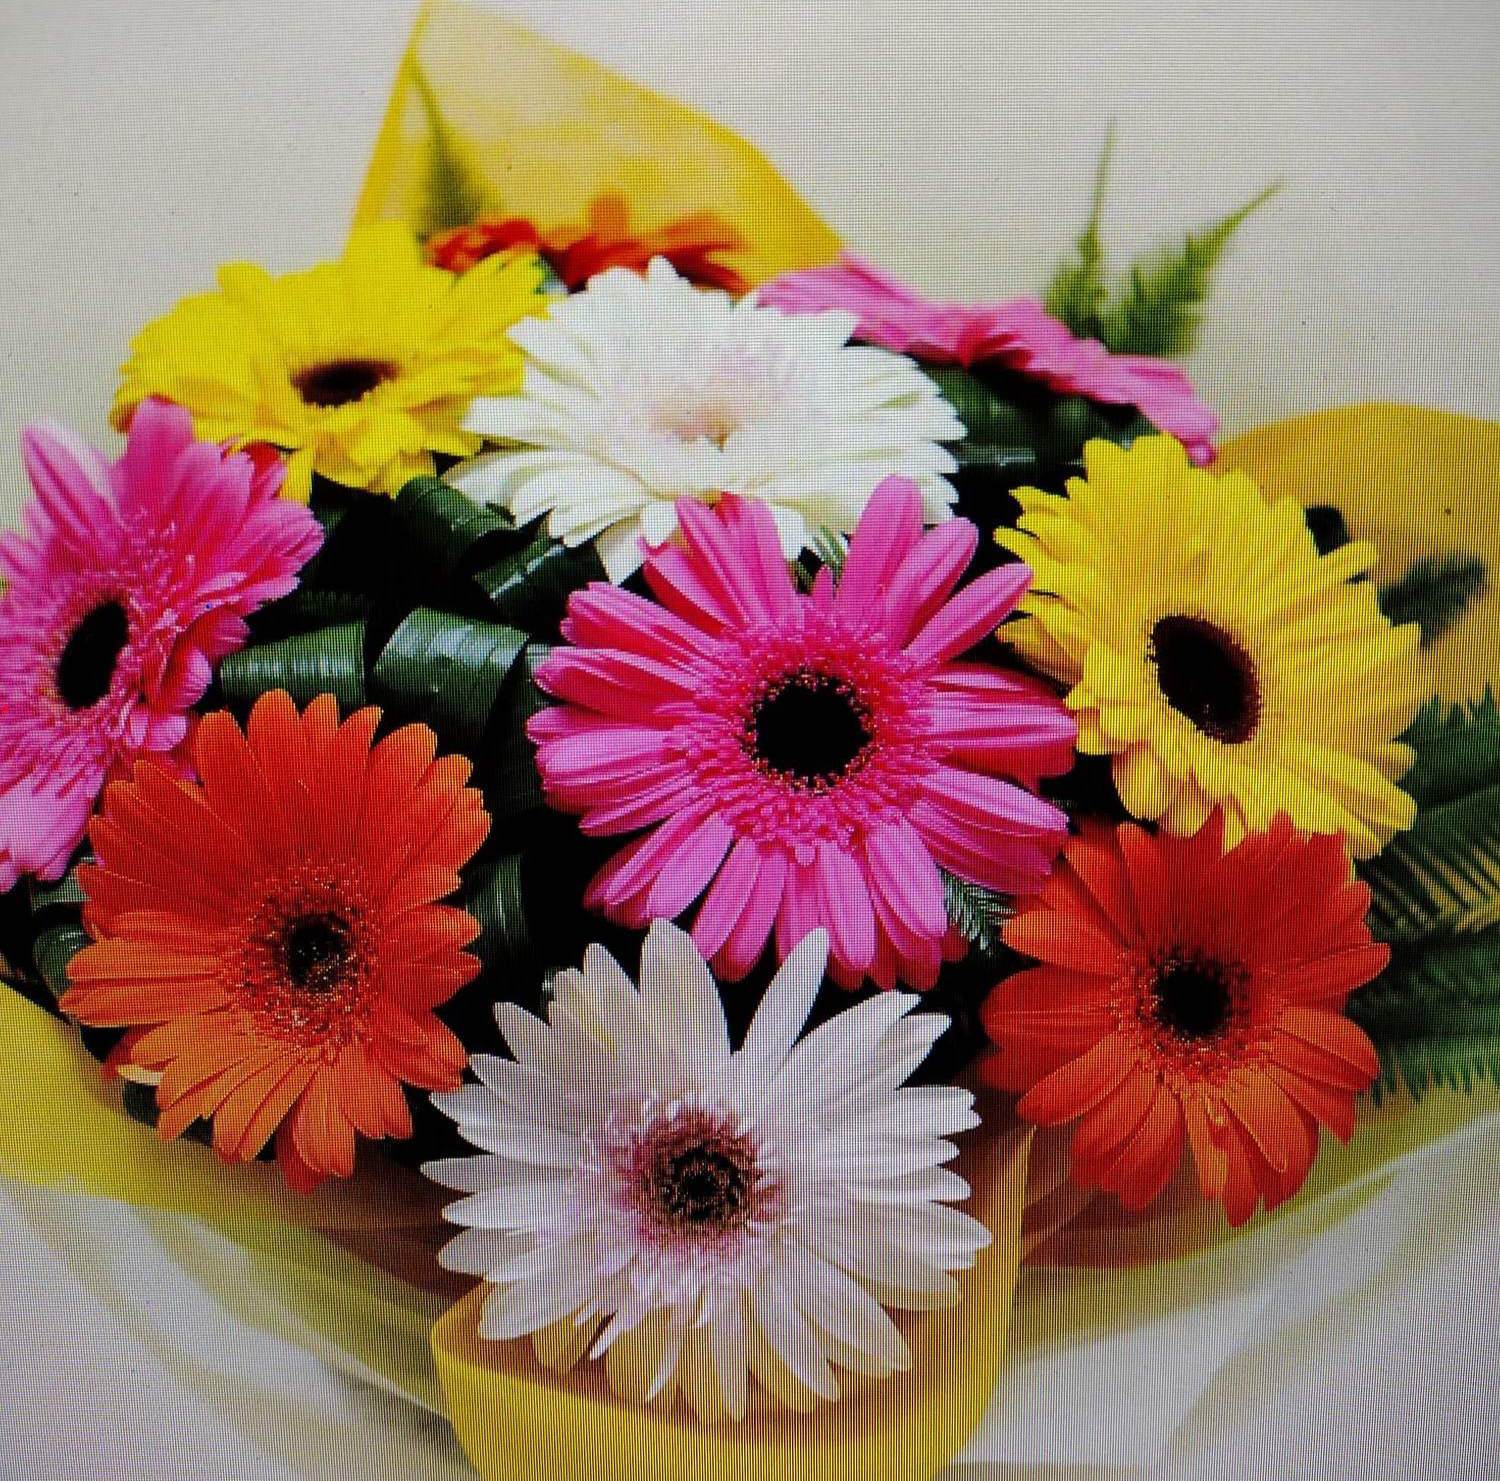 Brightest Light Gerber Bouquet - The name says it all with these brightly colored Gerber Daisies and lush greenery all wrapped together with a bow.